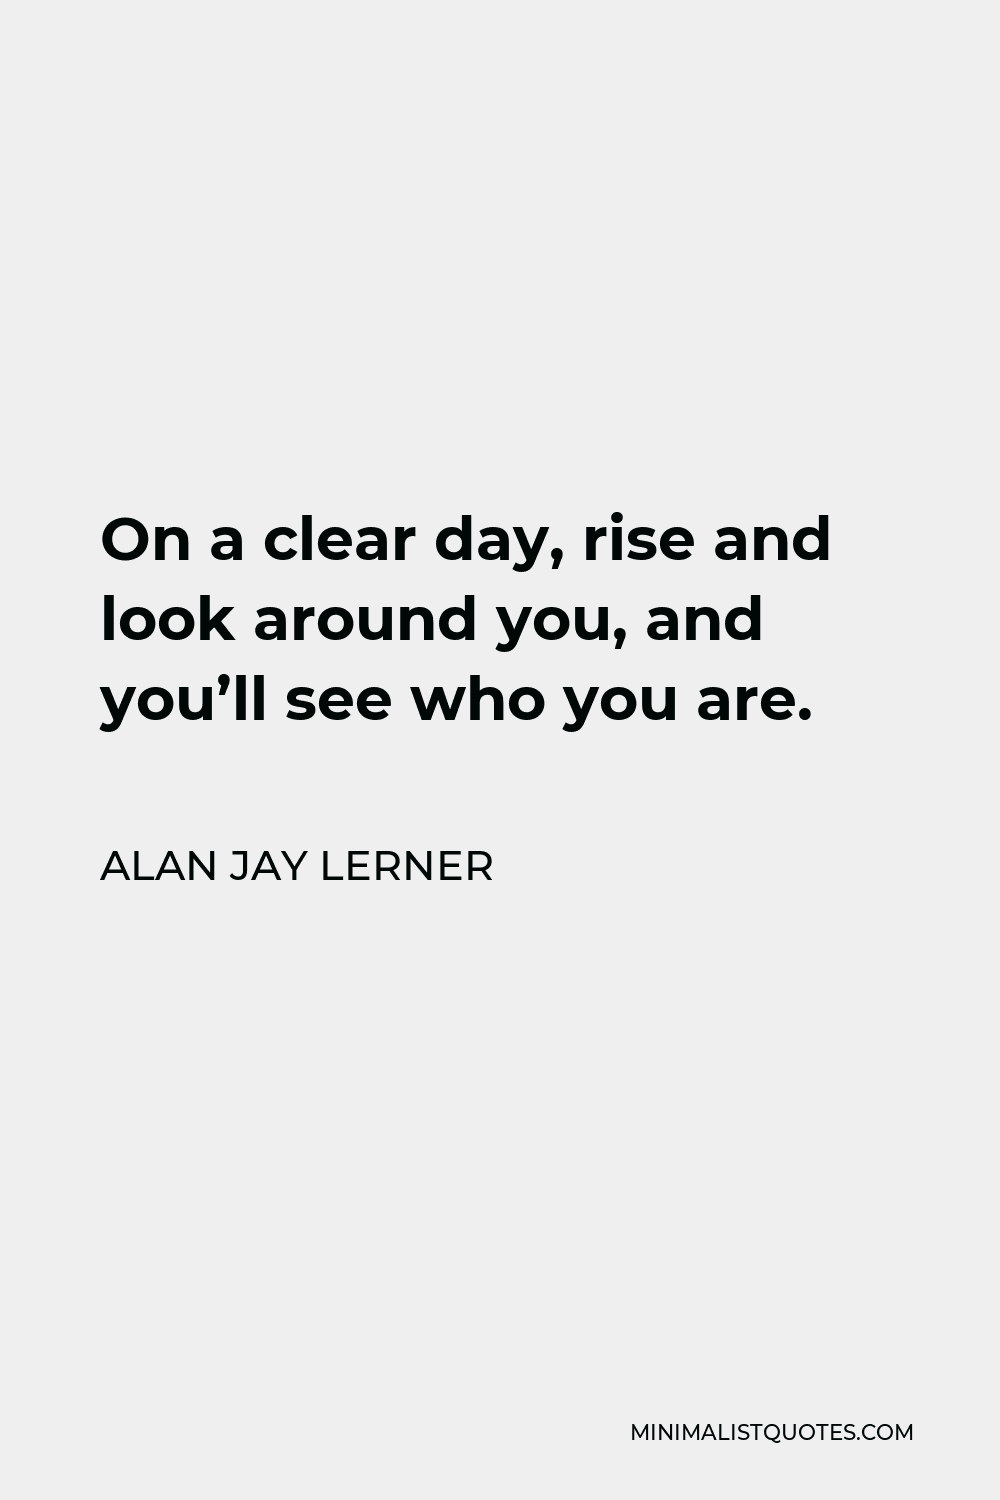 Alan Jay Lerner Quote - On a clear day, rise and look around you, and you’ll see who you are.